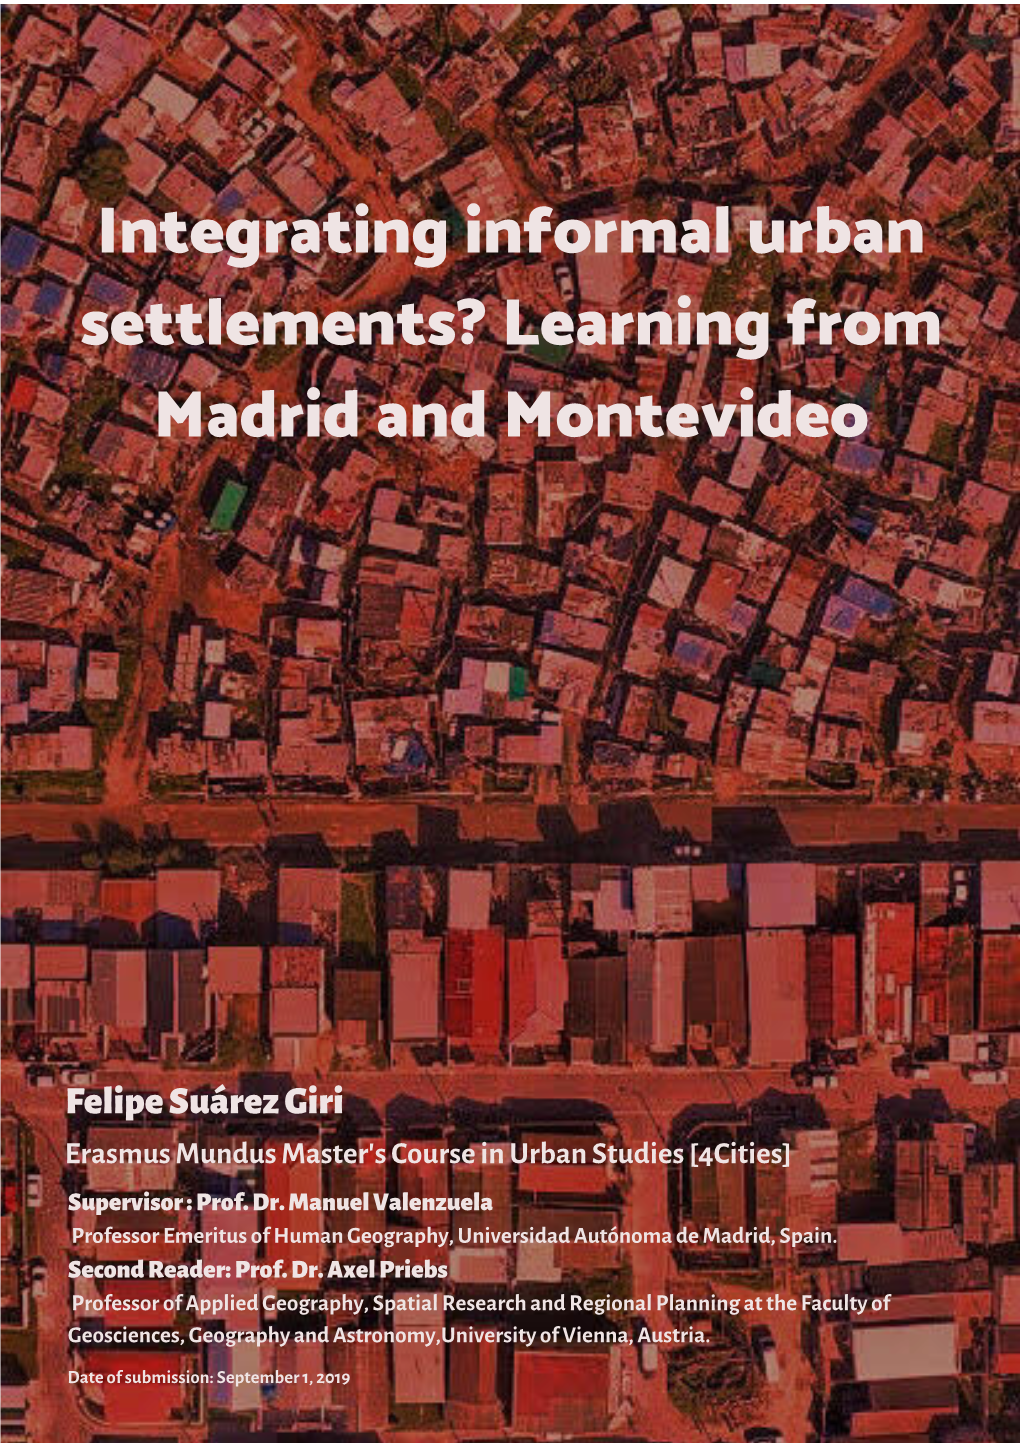 Integrating Informal Urban Settlements? Learning from Madrid and Montevideo